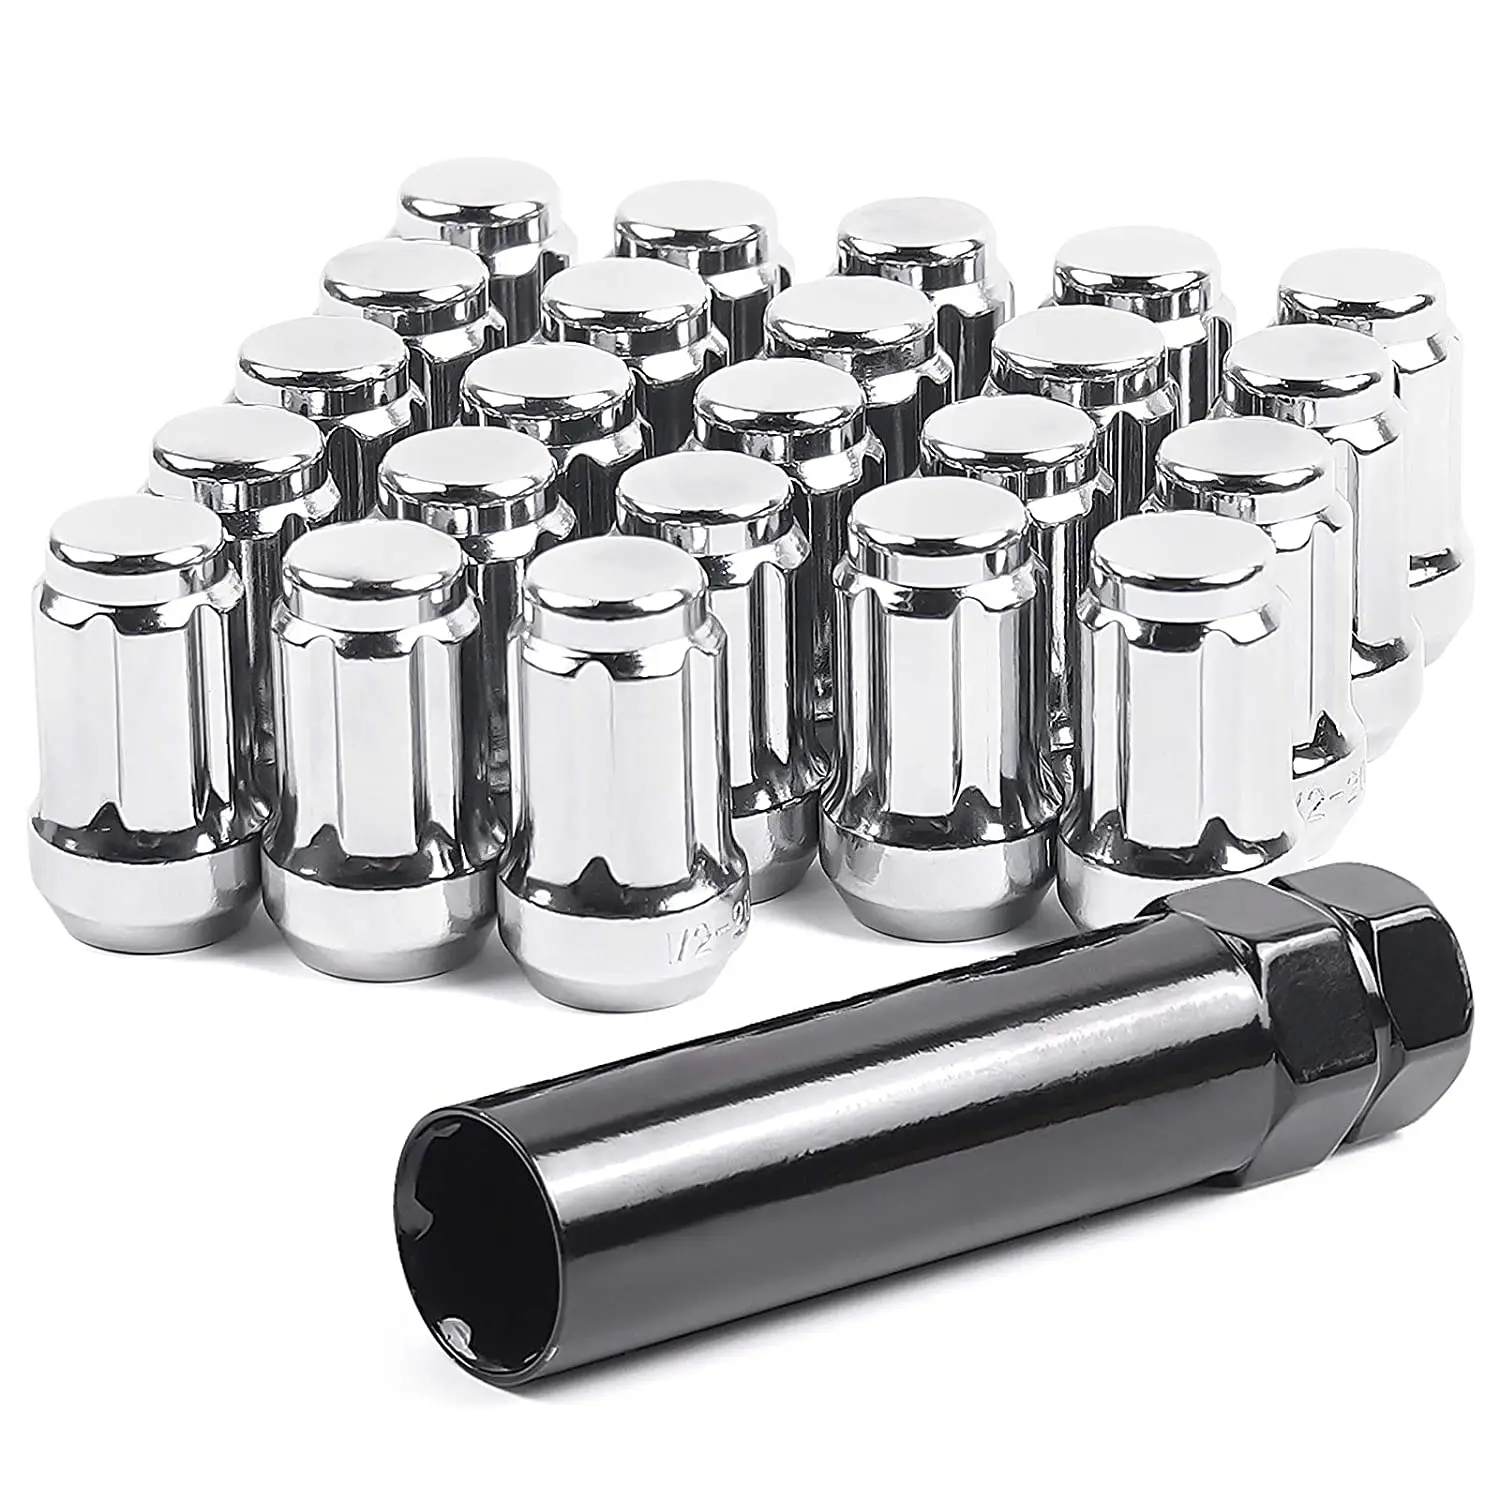 MIKKUPPA 23pcs 1/2-20 Lug Nuts Spline Replacement for 2002-2012 Jeep Liberty Aftermarket Wheel Chrome/Black Closed End Lug Nuts